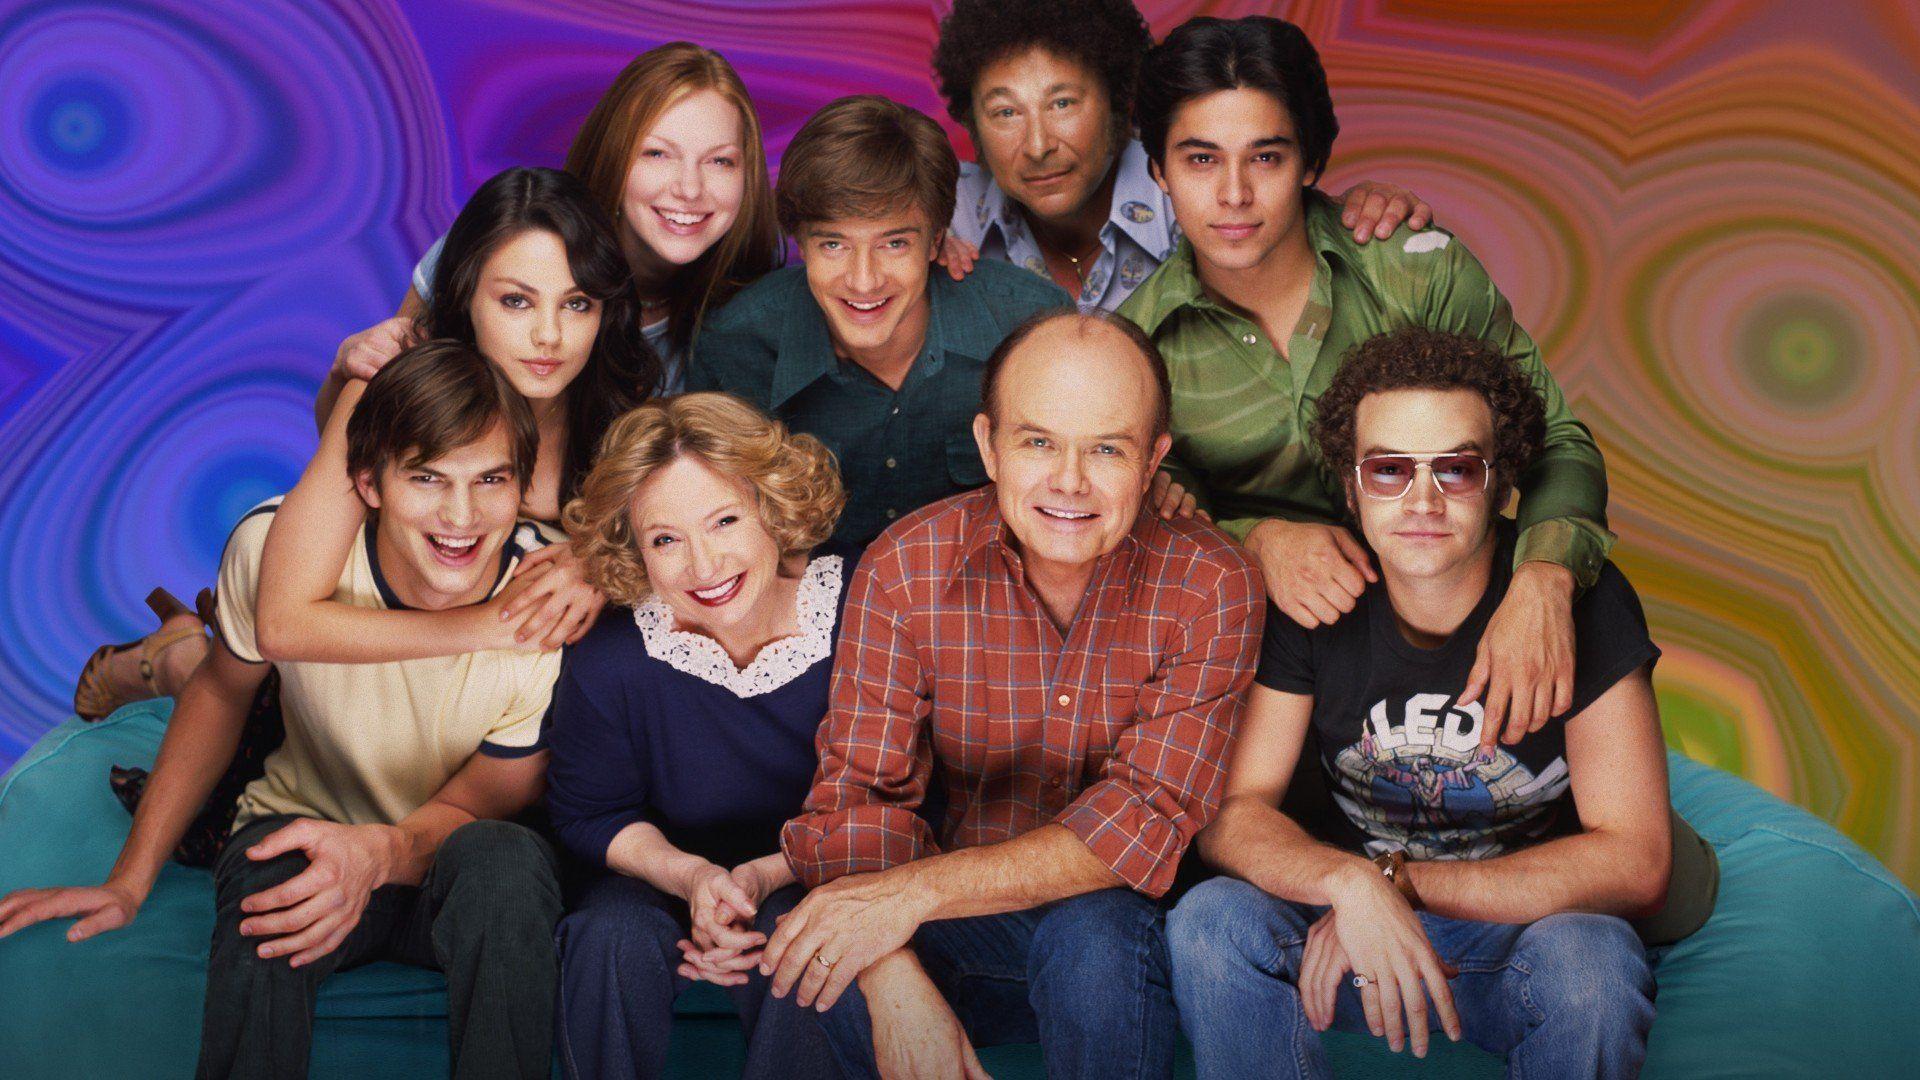 That '70s Show 10th Anniversary: See Where the Stars Are Now